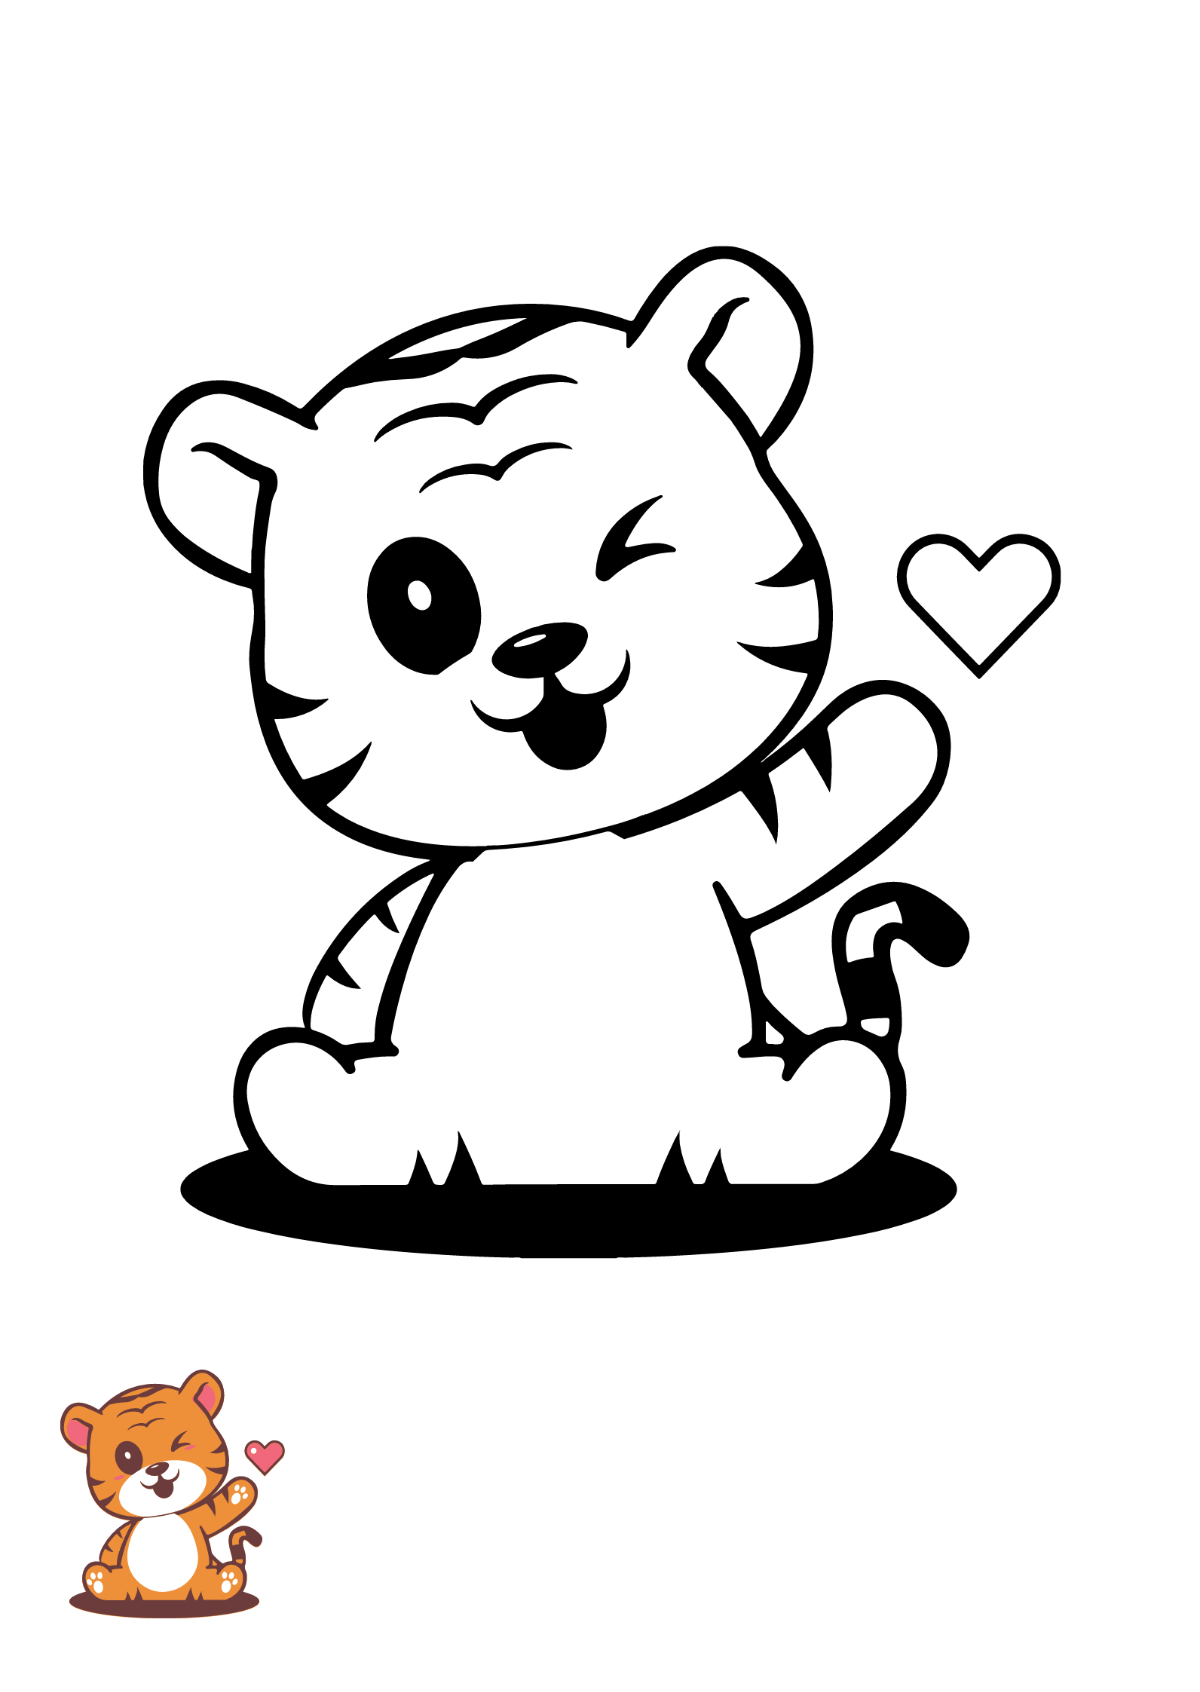 Free tiger coloring page s examples